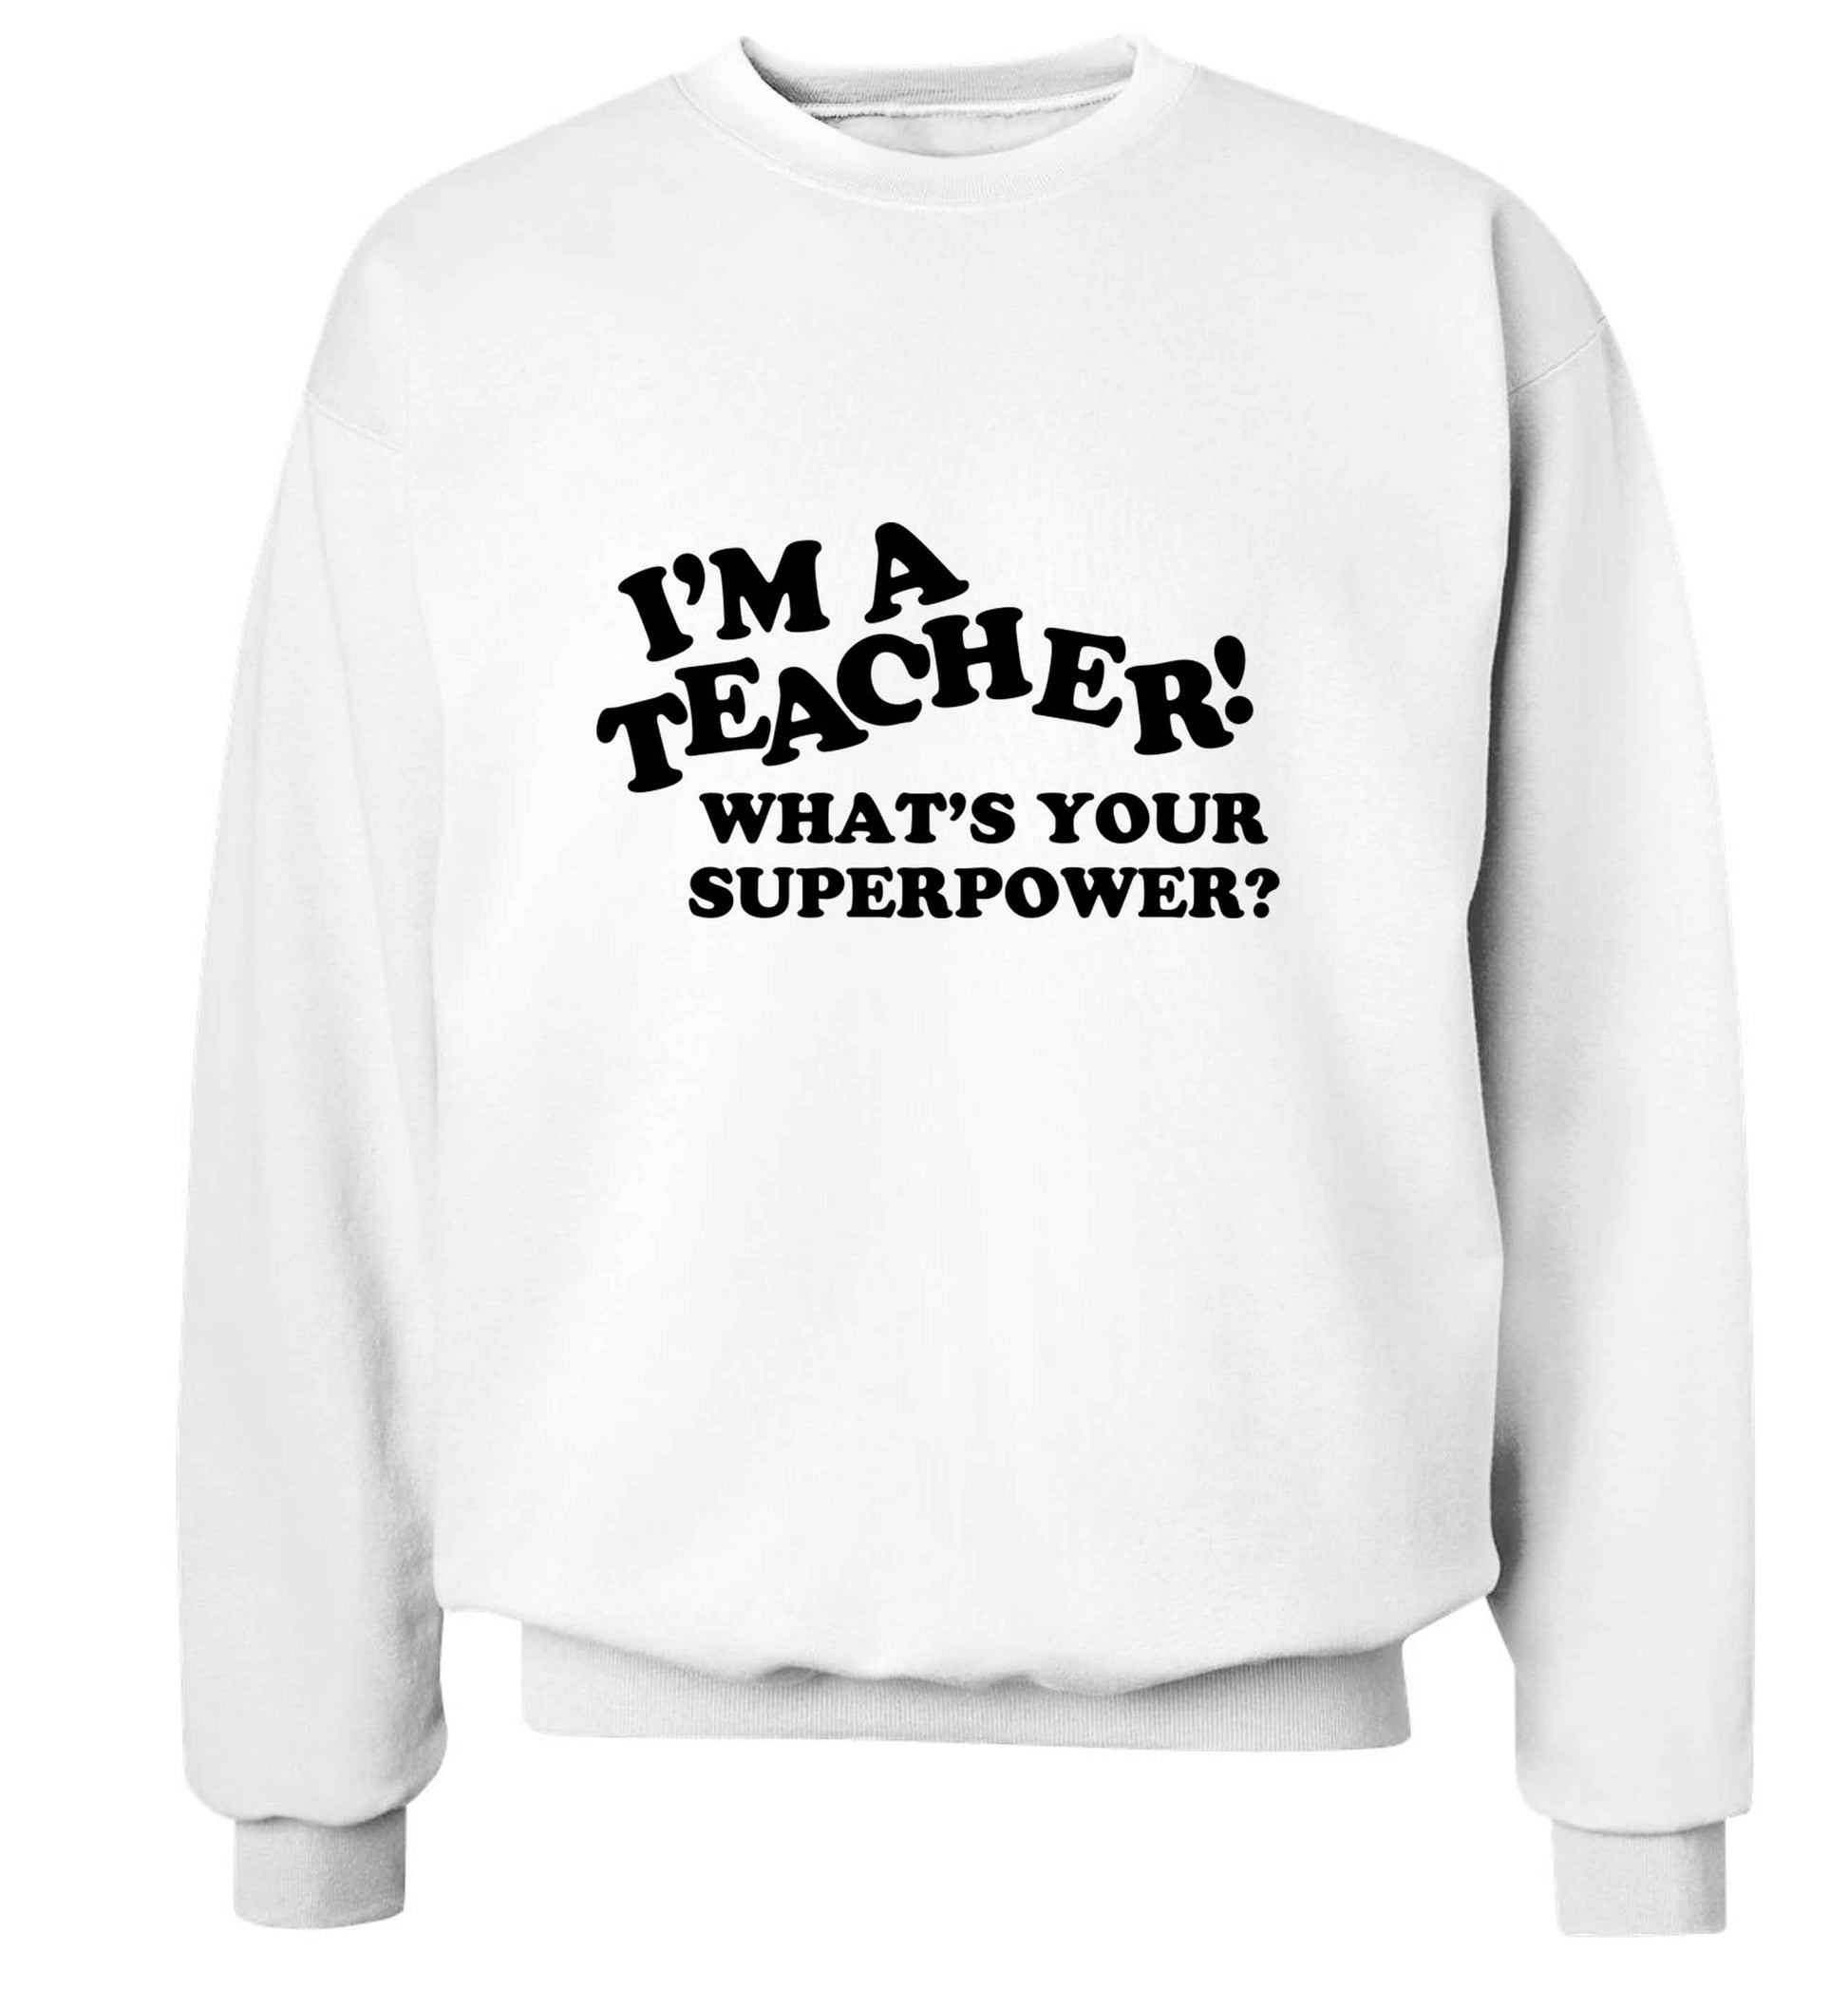 I'm a teacher what's your superpower?! adult's unisex white sweater 2XL